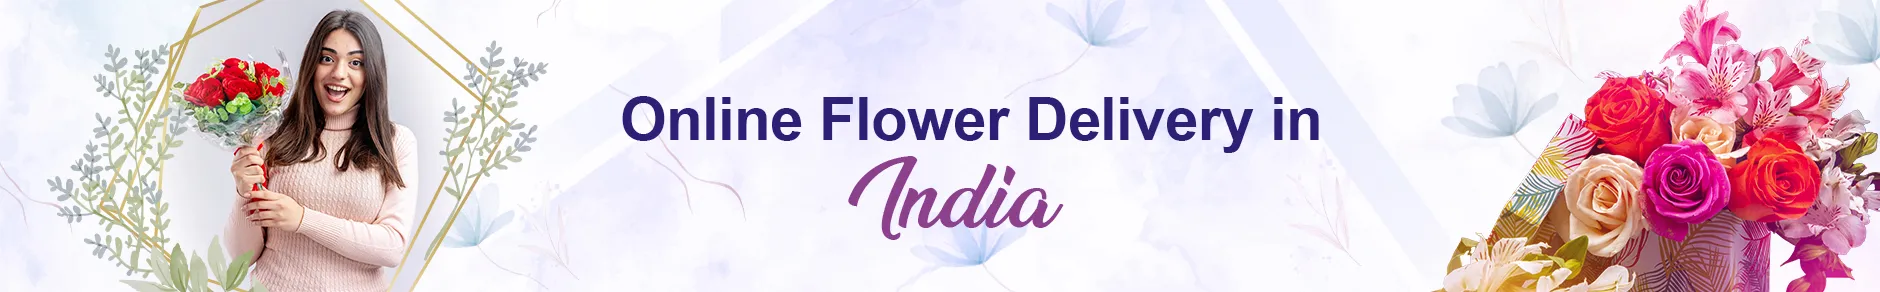 Same Day Flower Delivery in India - Free Delivery